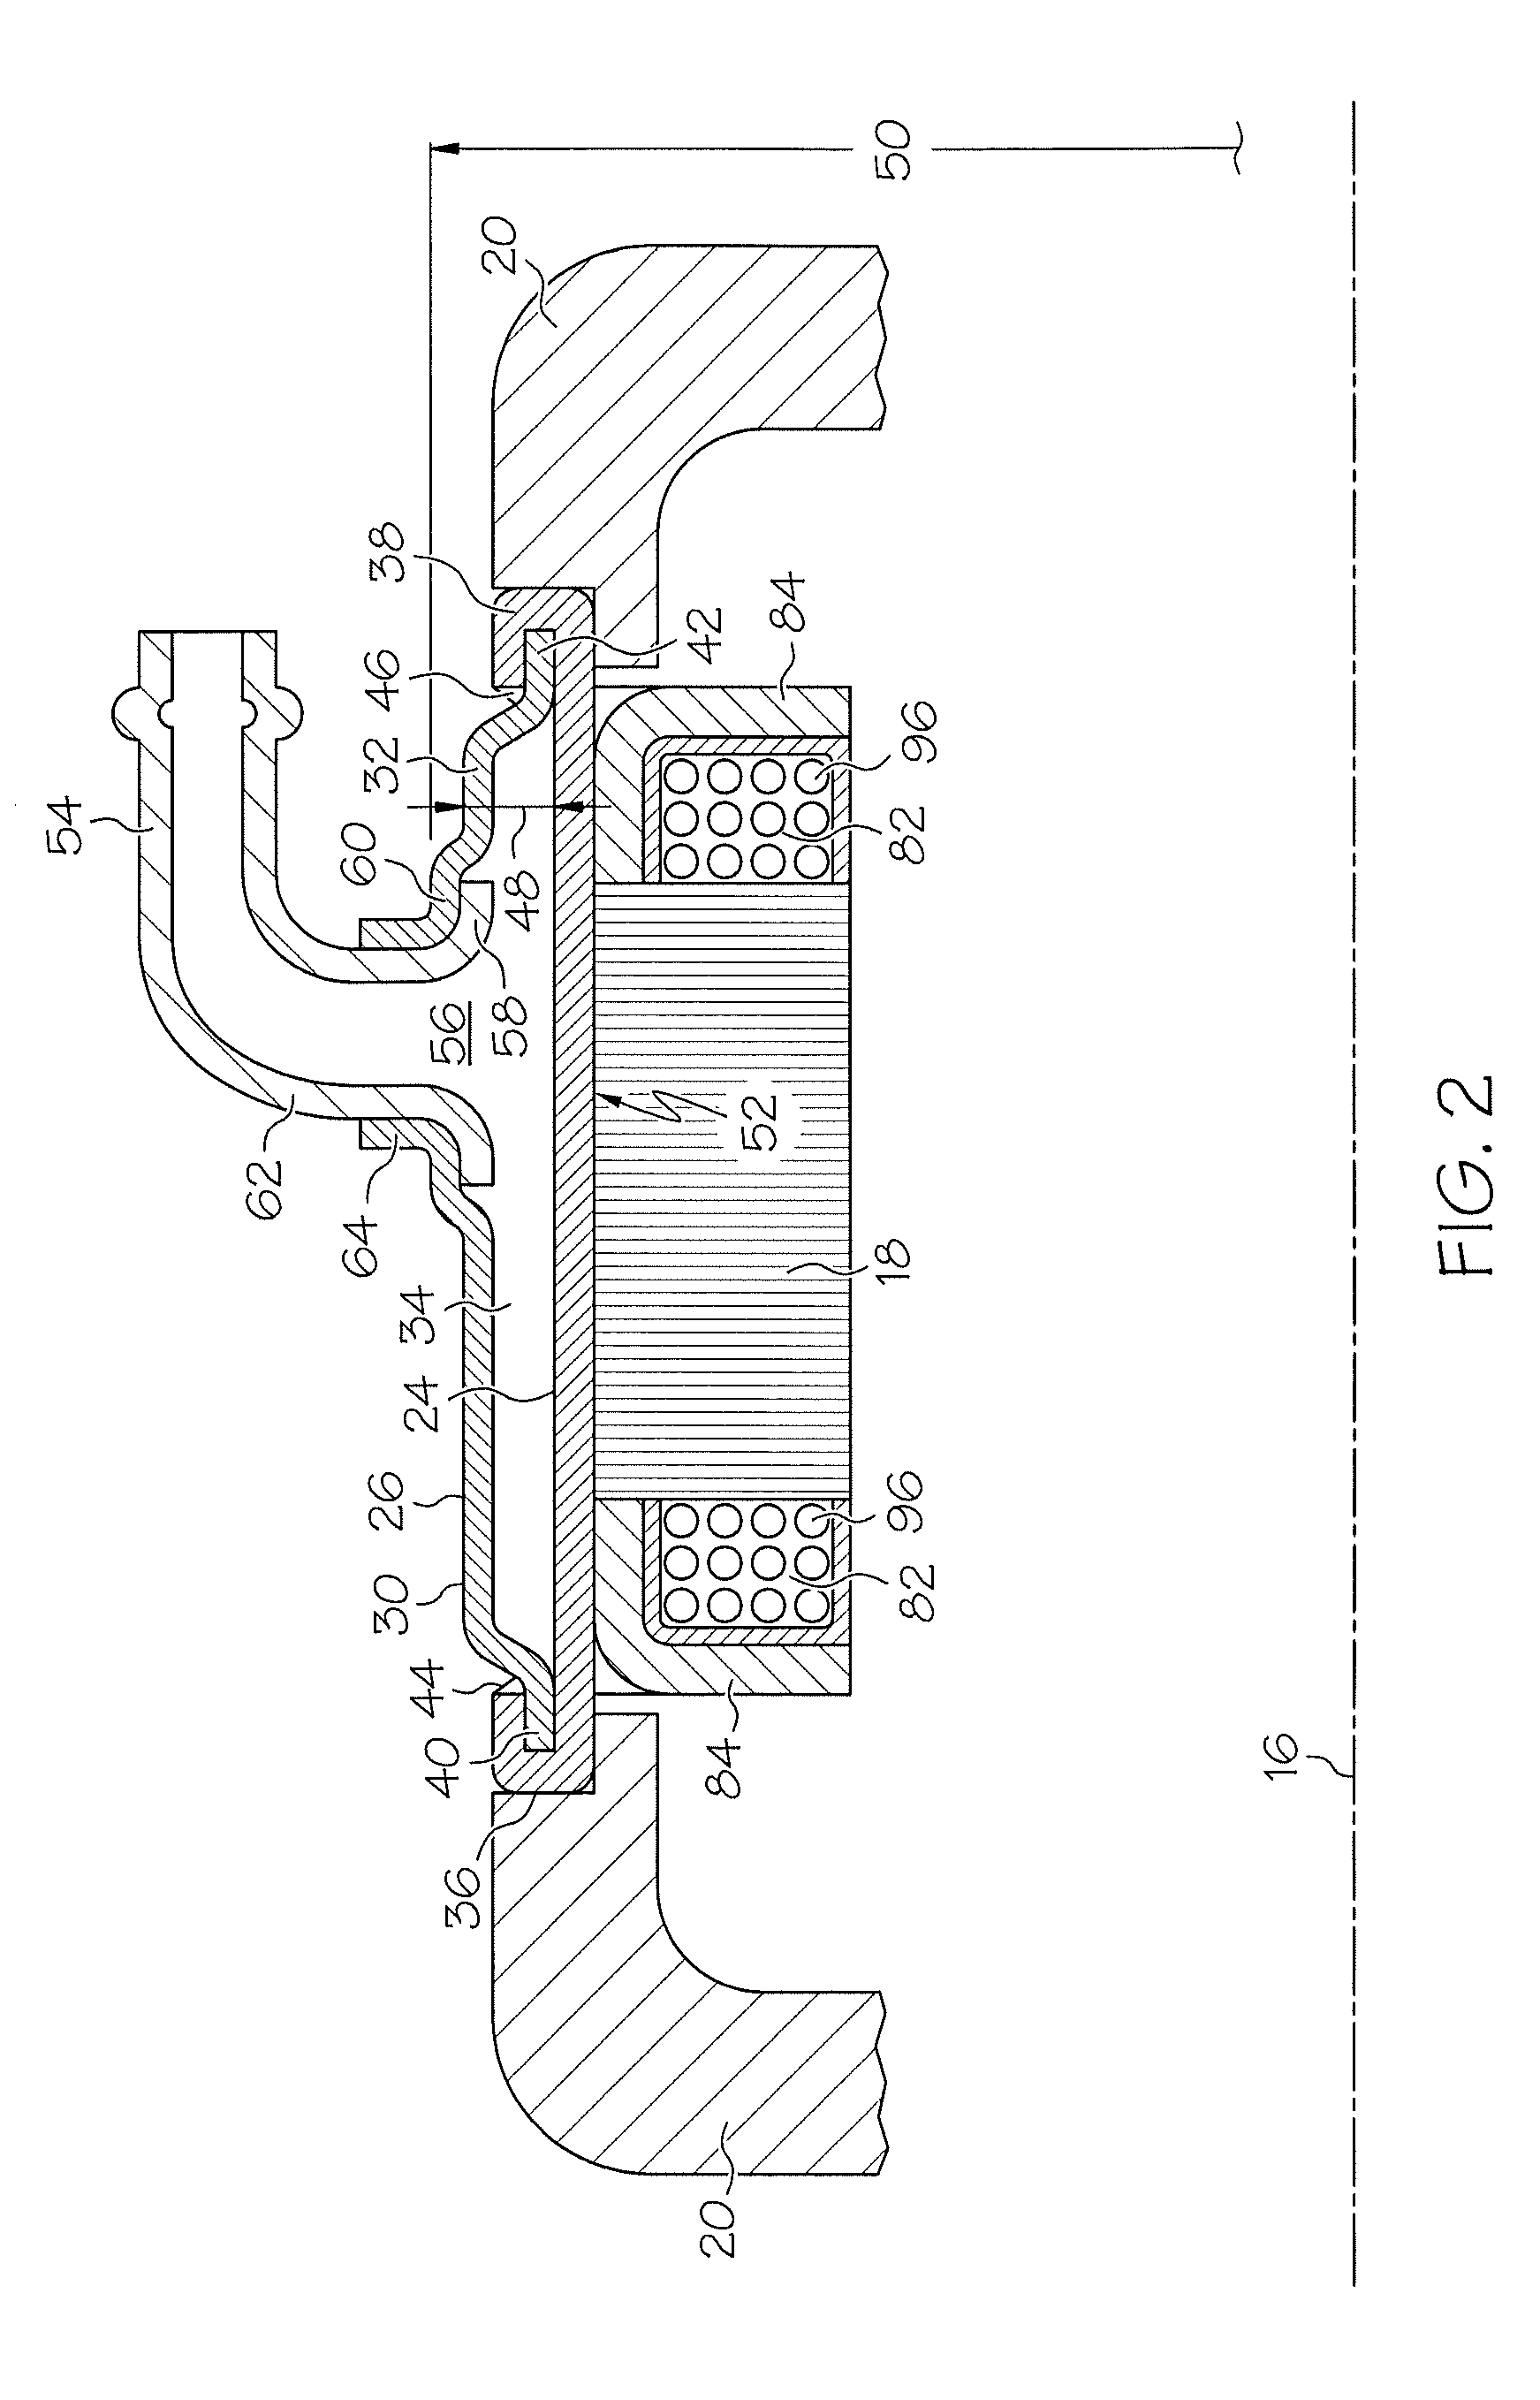 Liquid cooling system of an electric machine